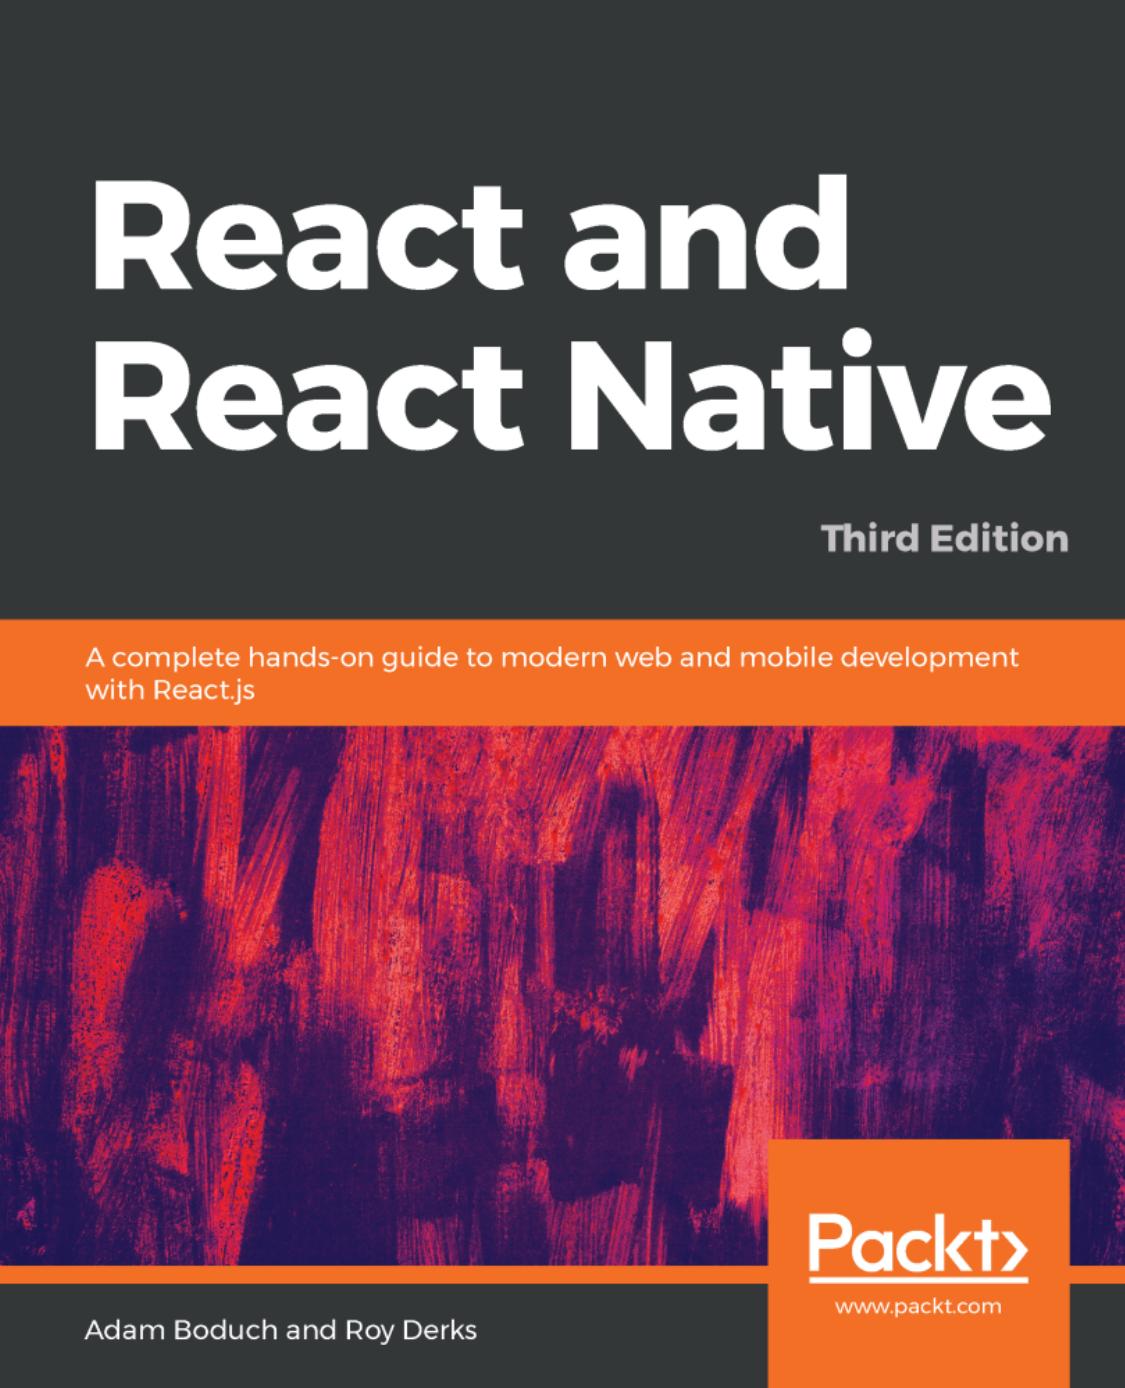 React and React Native: A Complete Hands-On Guide to Modern Web and Mobile Development with React.js